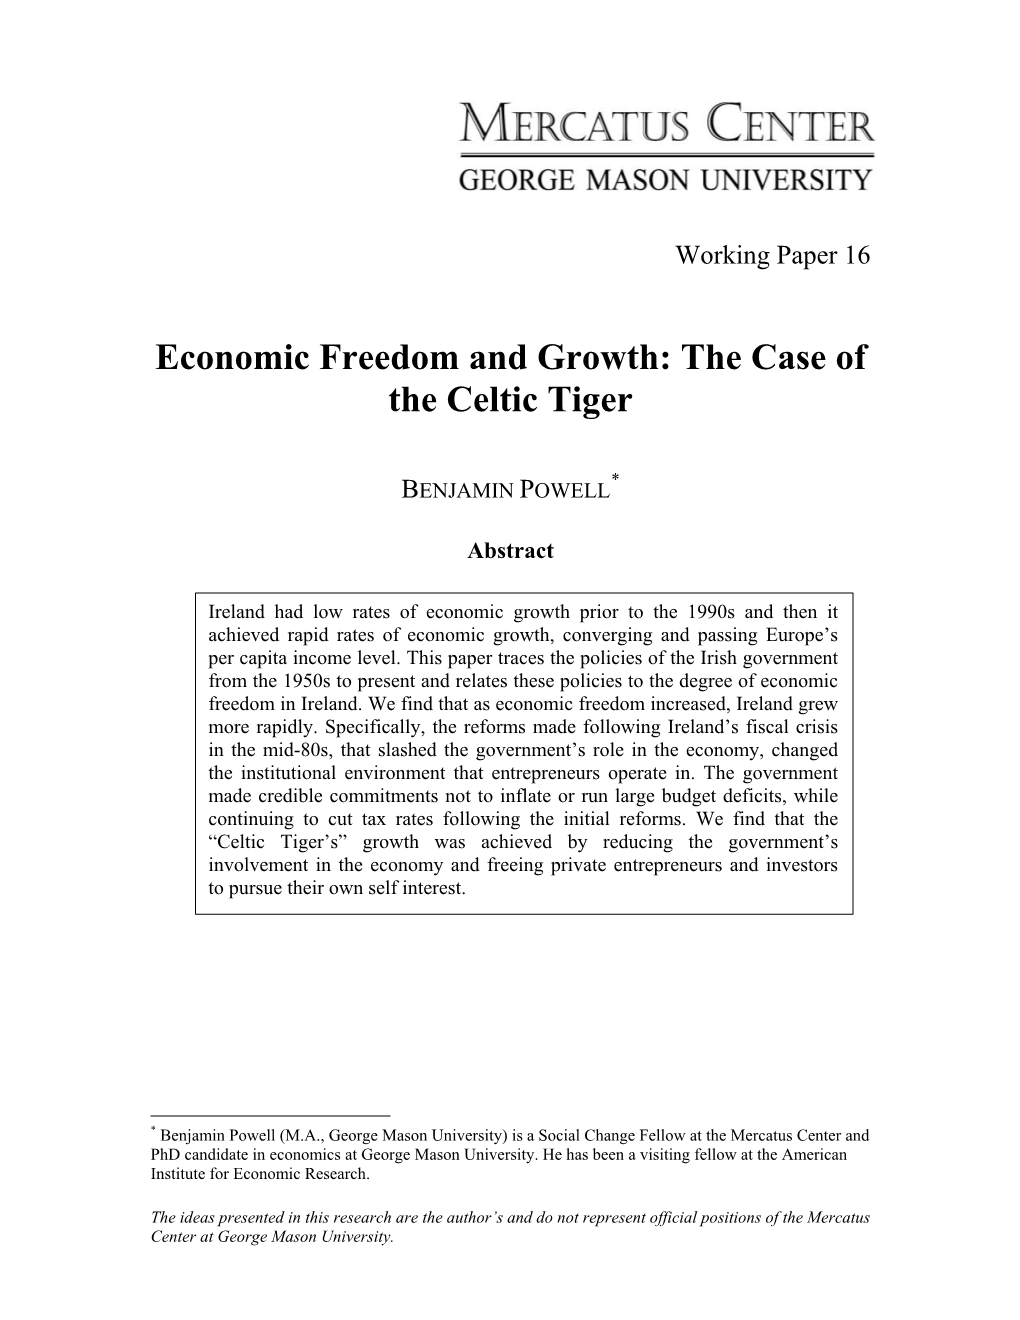 Economic Freedom and Growth: the Case of the Celtic Tiger